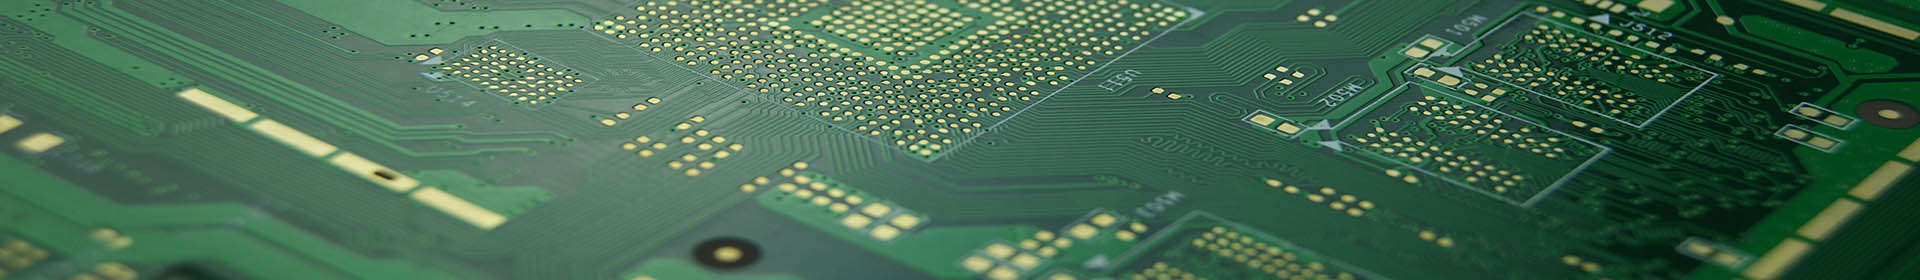 Single-sided PCB manufacturing process